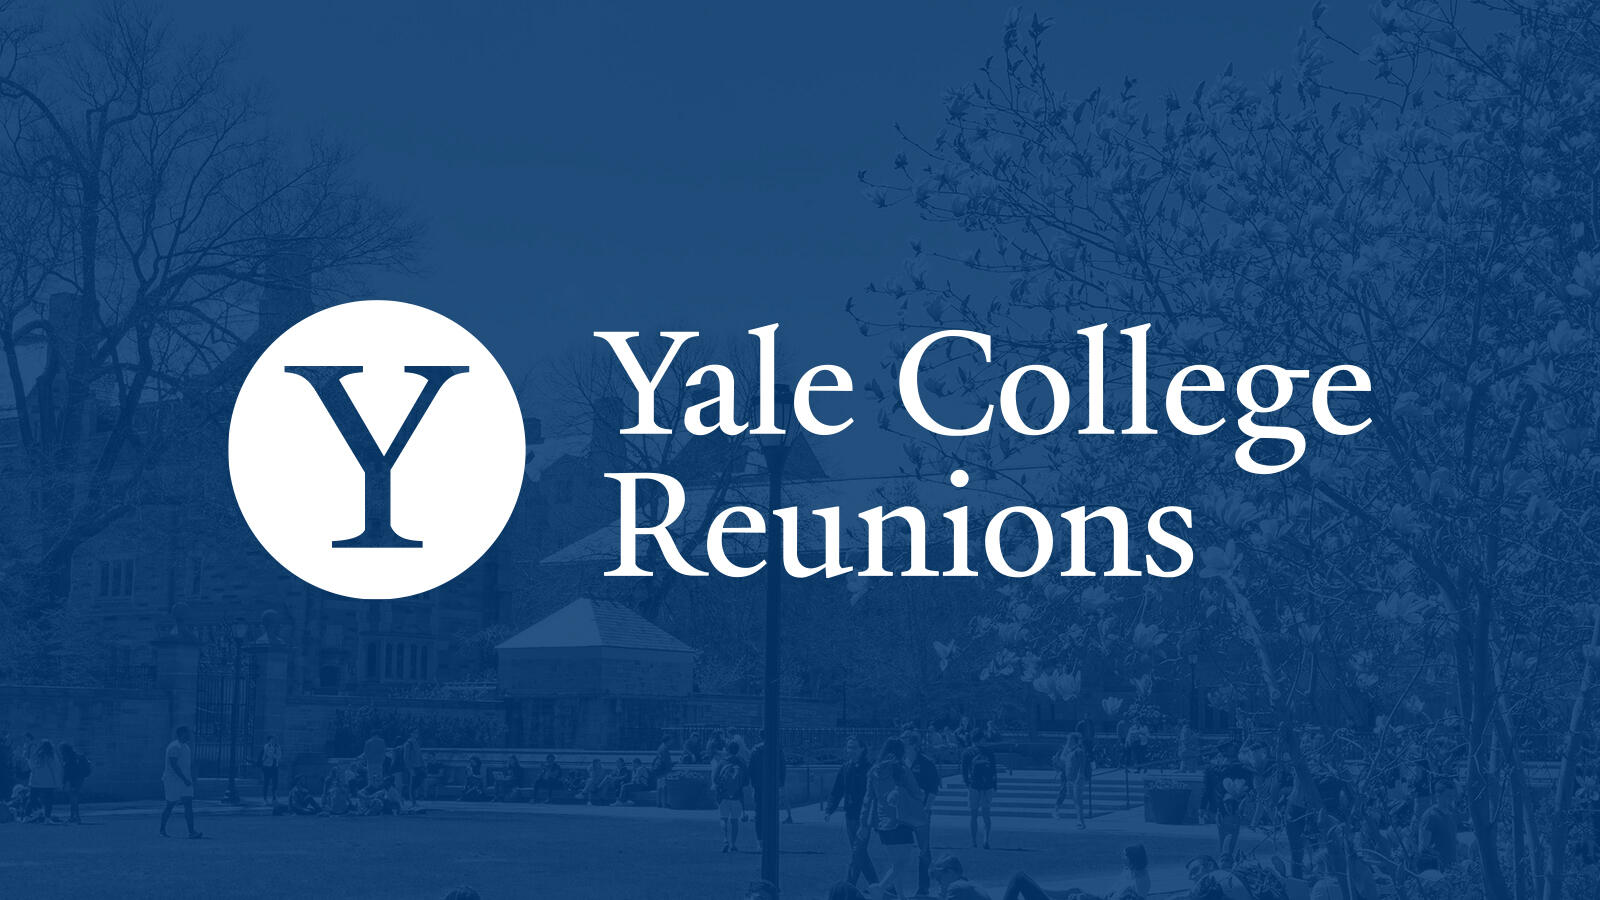 Yale College Reunions